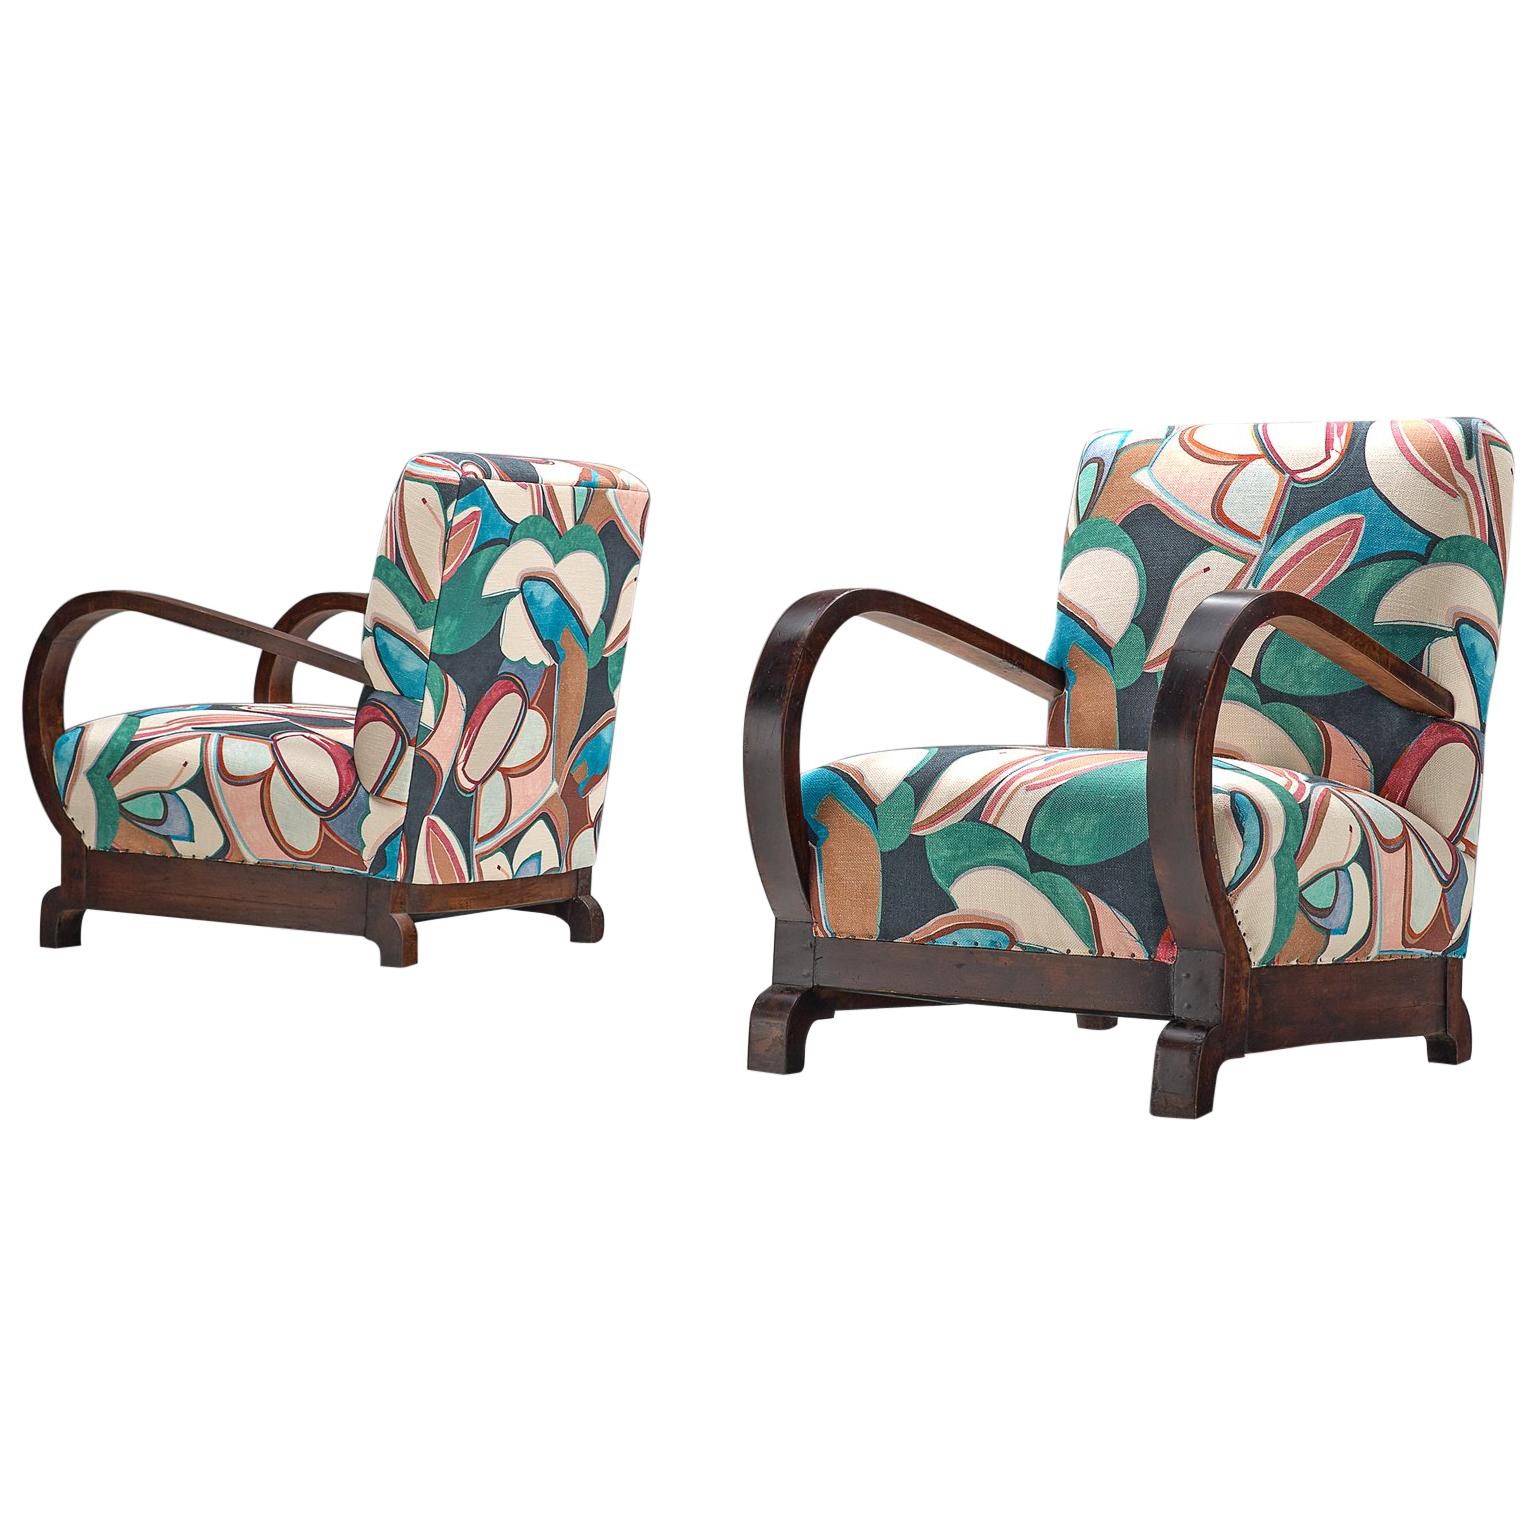 Pair of Art Deco Chairs Reupholstered with a Floral Dedar Fabric